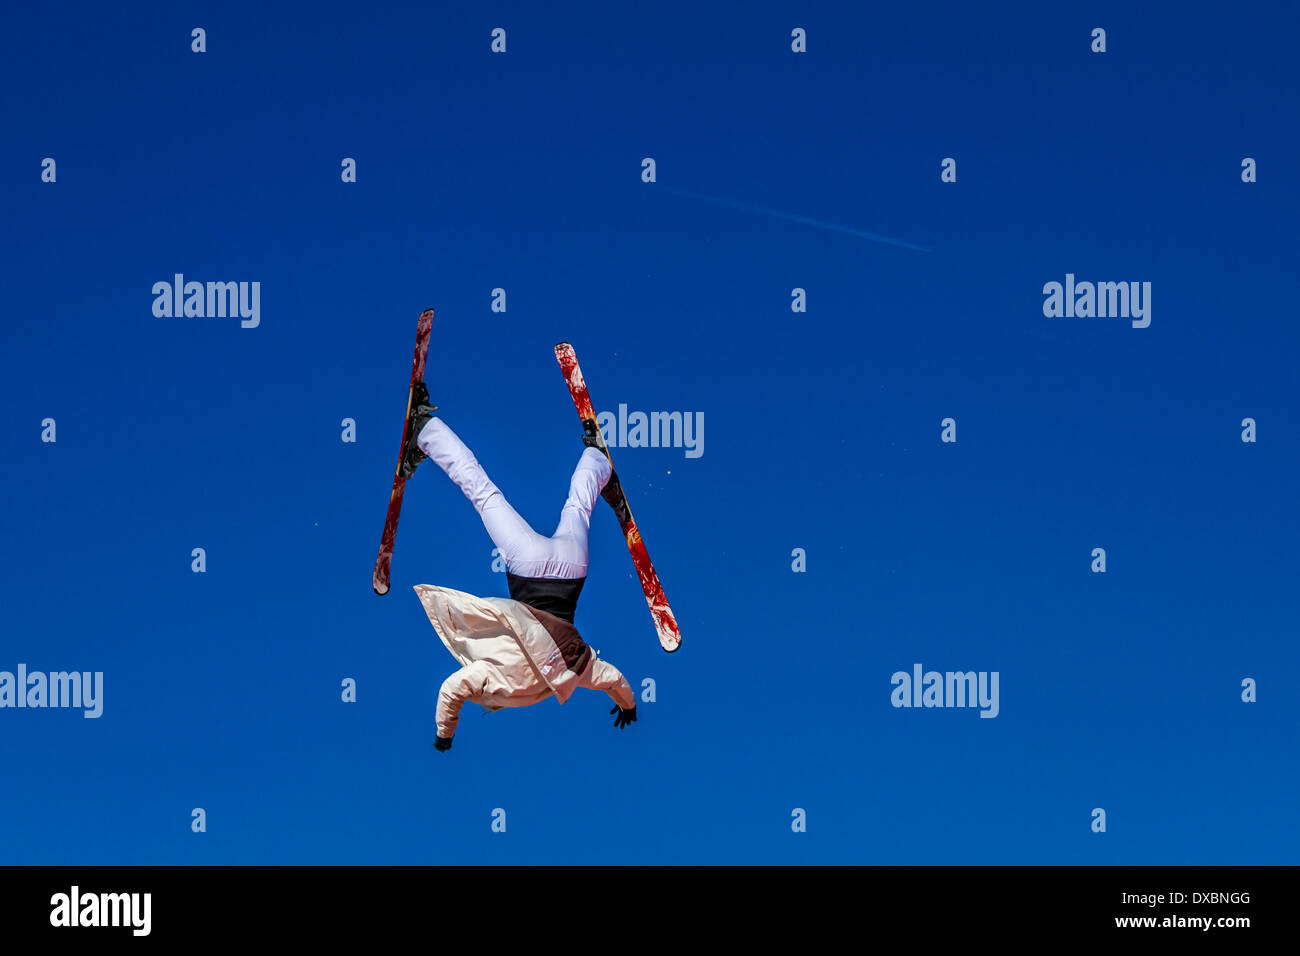 Skier upside down and out of control against a blue sky Stock Photo